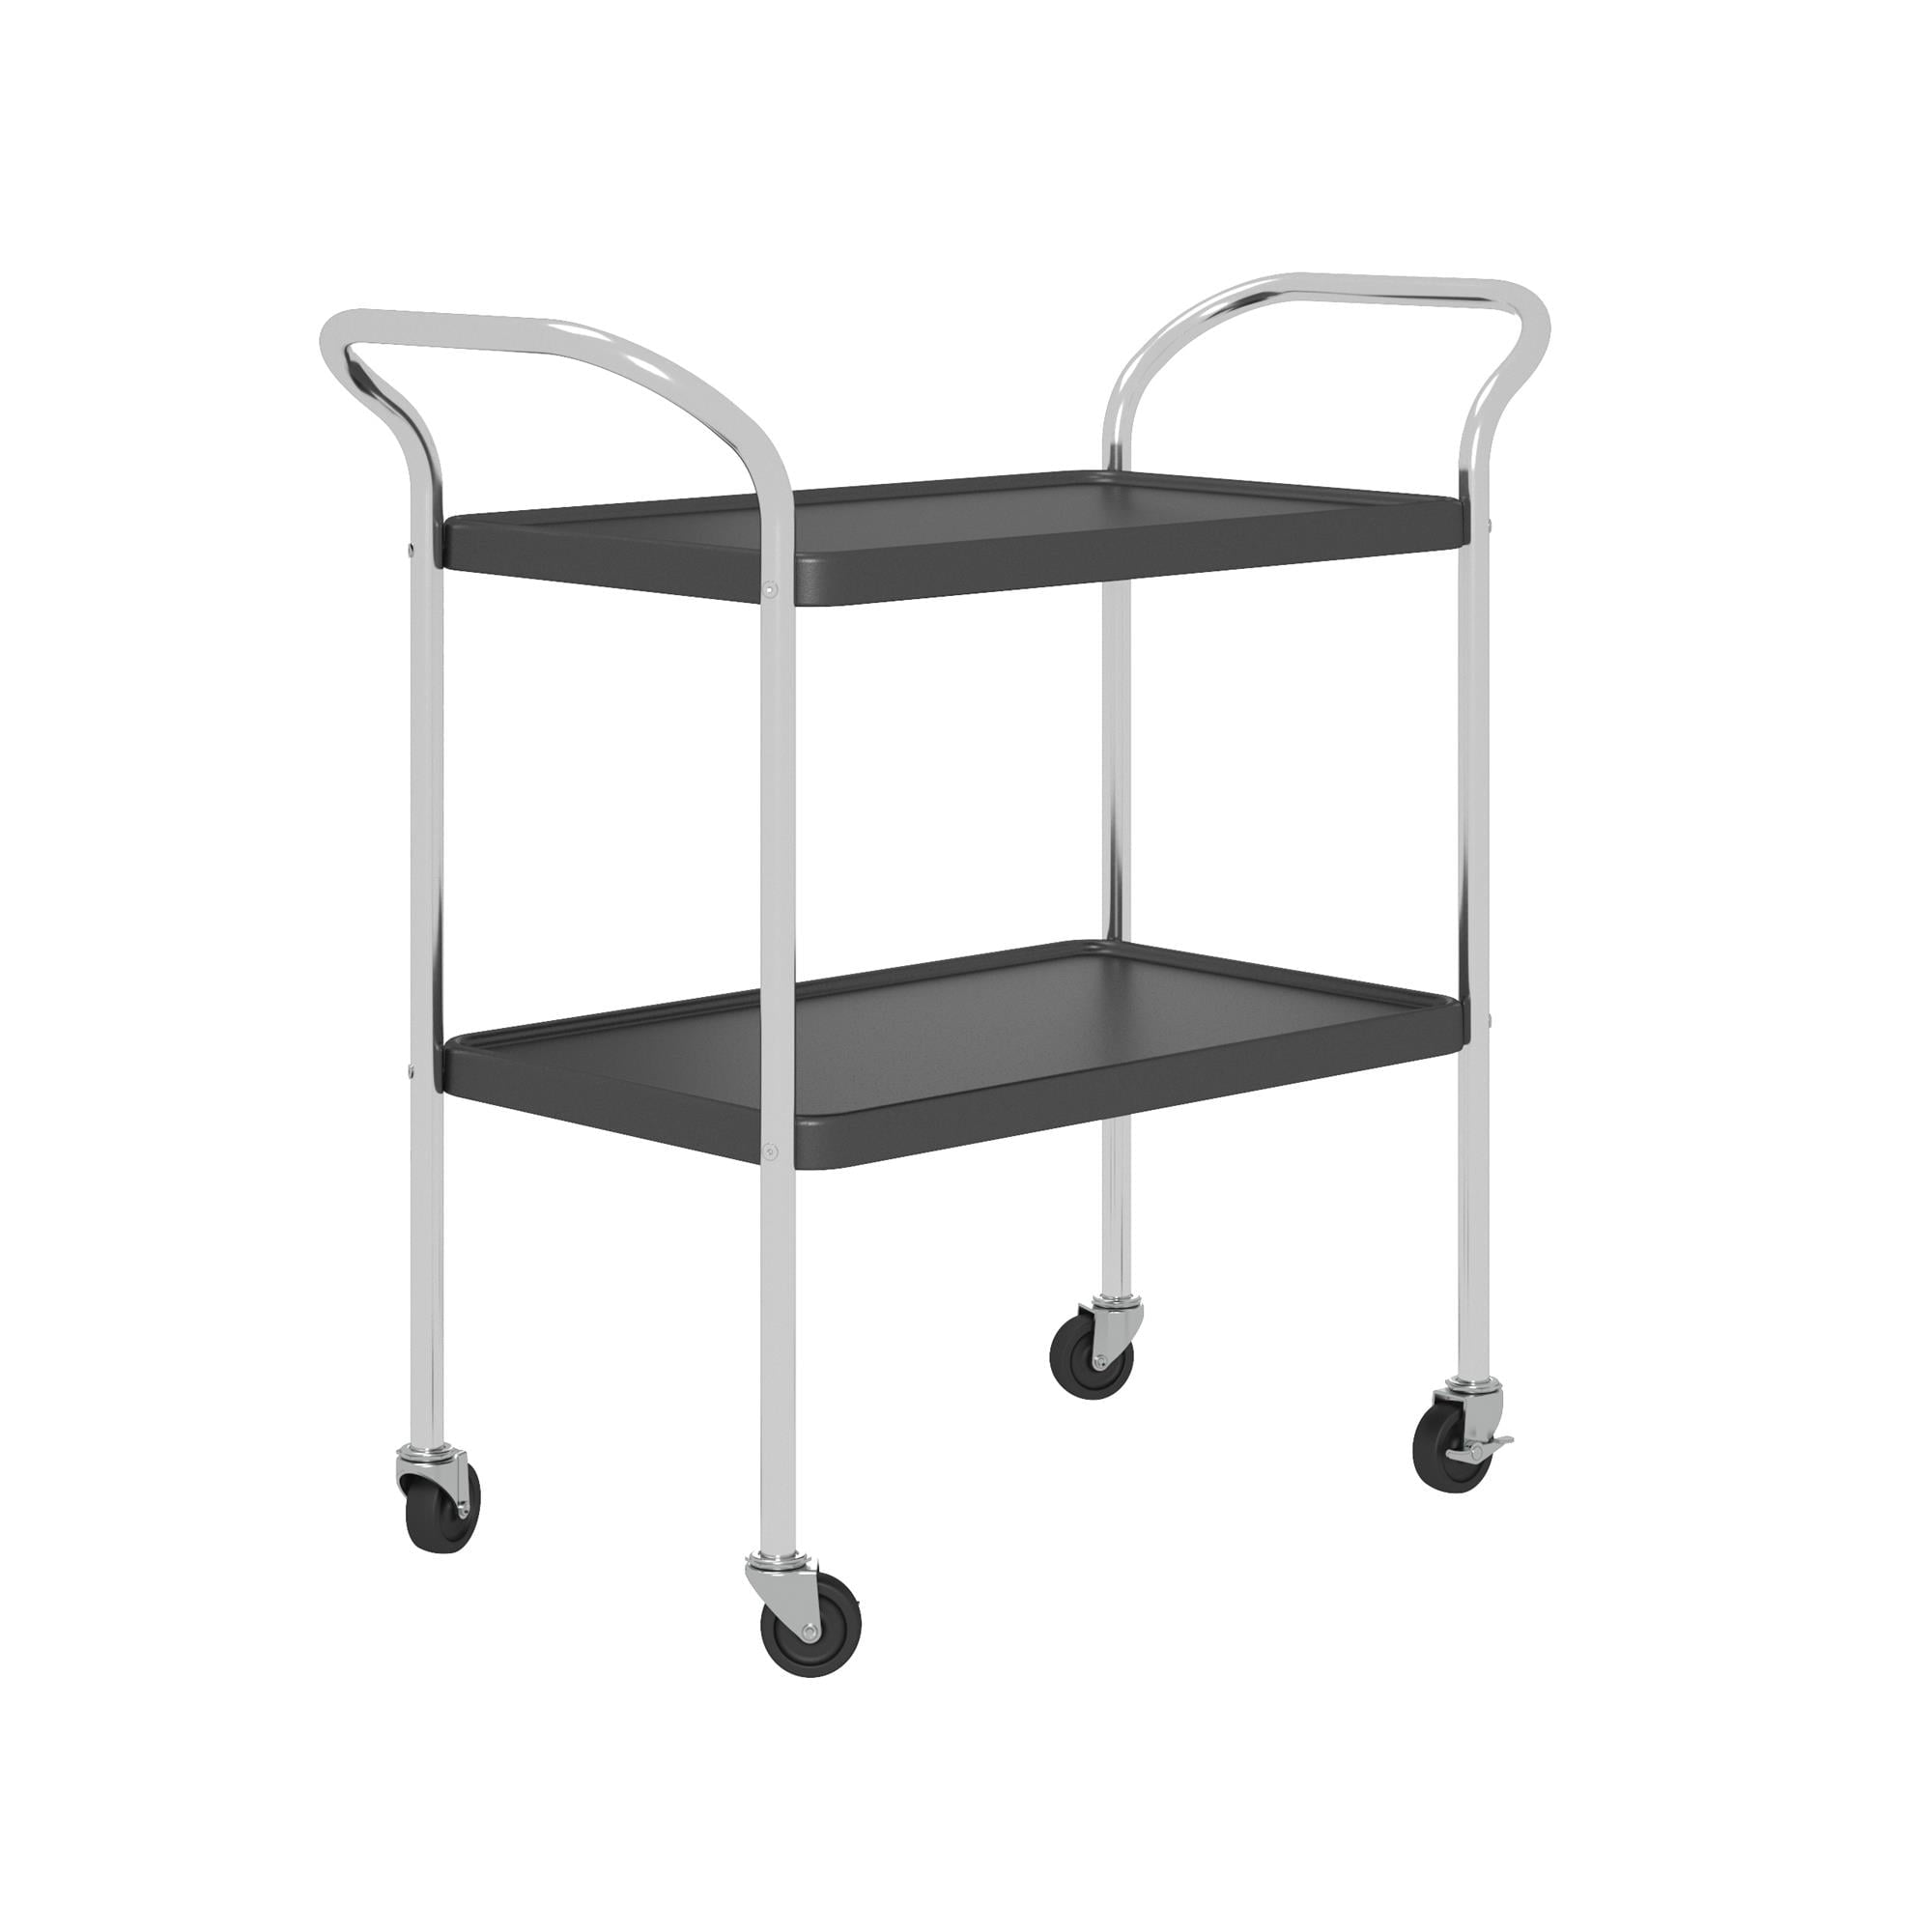 COSCO Stylaire 2 Tier Serving Cart, Black & Silver